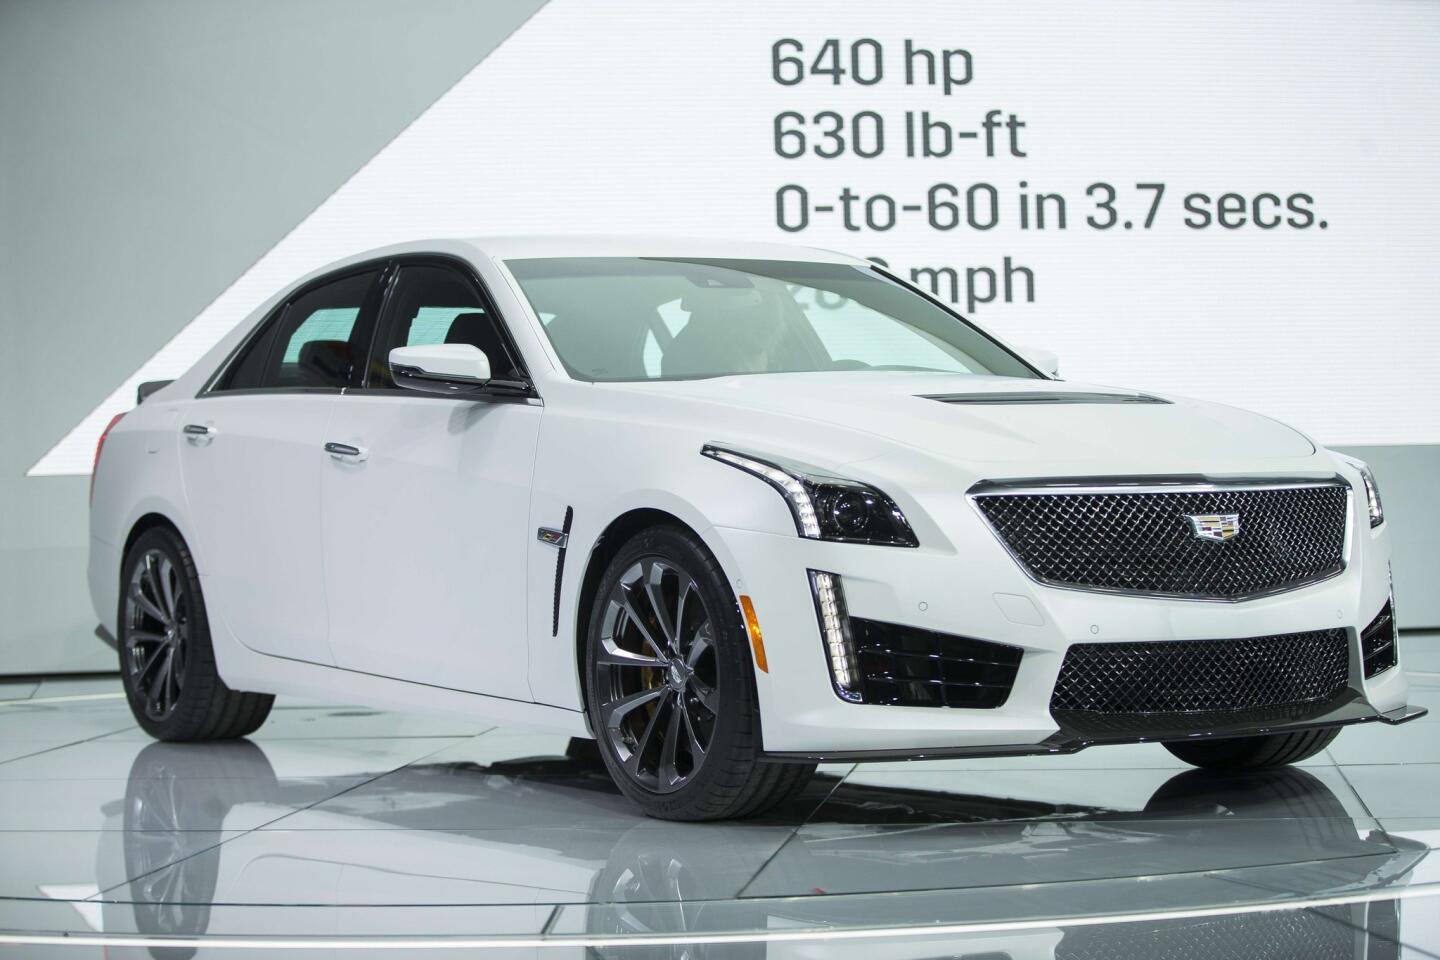 The 640-horsepower Cadillac CTS-V is unveiled at the 2015 Detroit Auto Show.